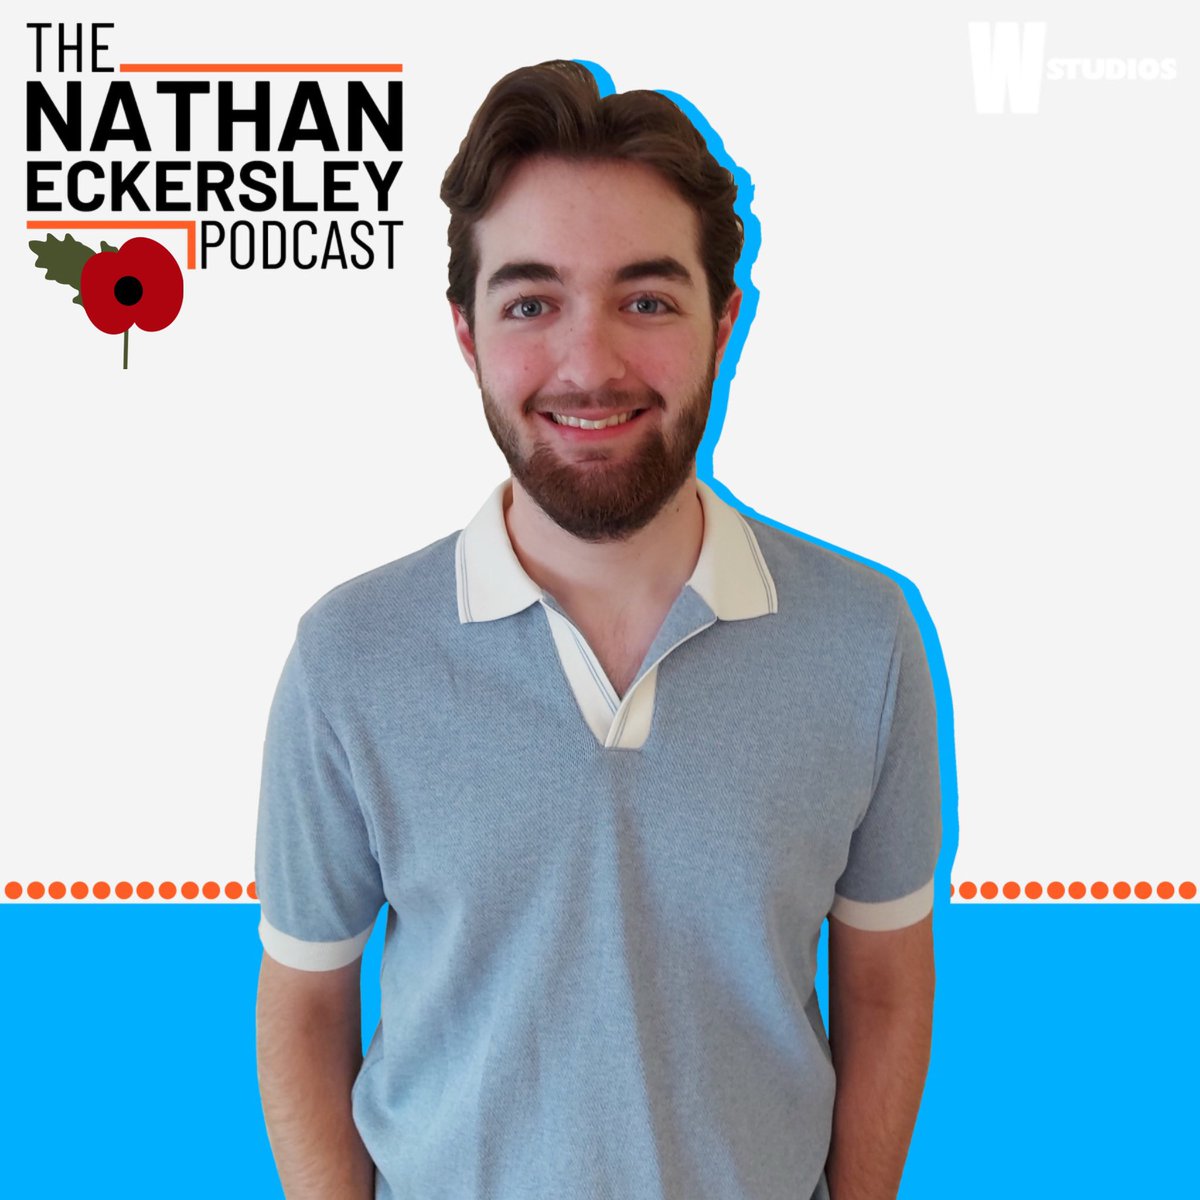 This week on The Nathan Eckersley Podcast, I’ll be looking at the King’s Speech and asking if the State Opening ceremony was better than the speech itself. I’ll also reflect on Remembrance Weekend and ask if we are forgetting its importance. Listen from 3pm on @wizradio